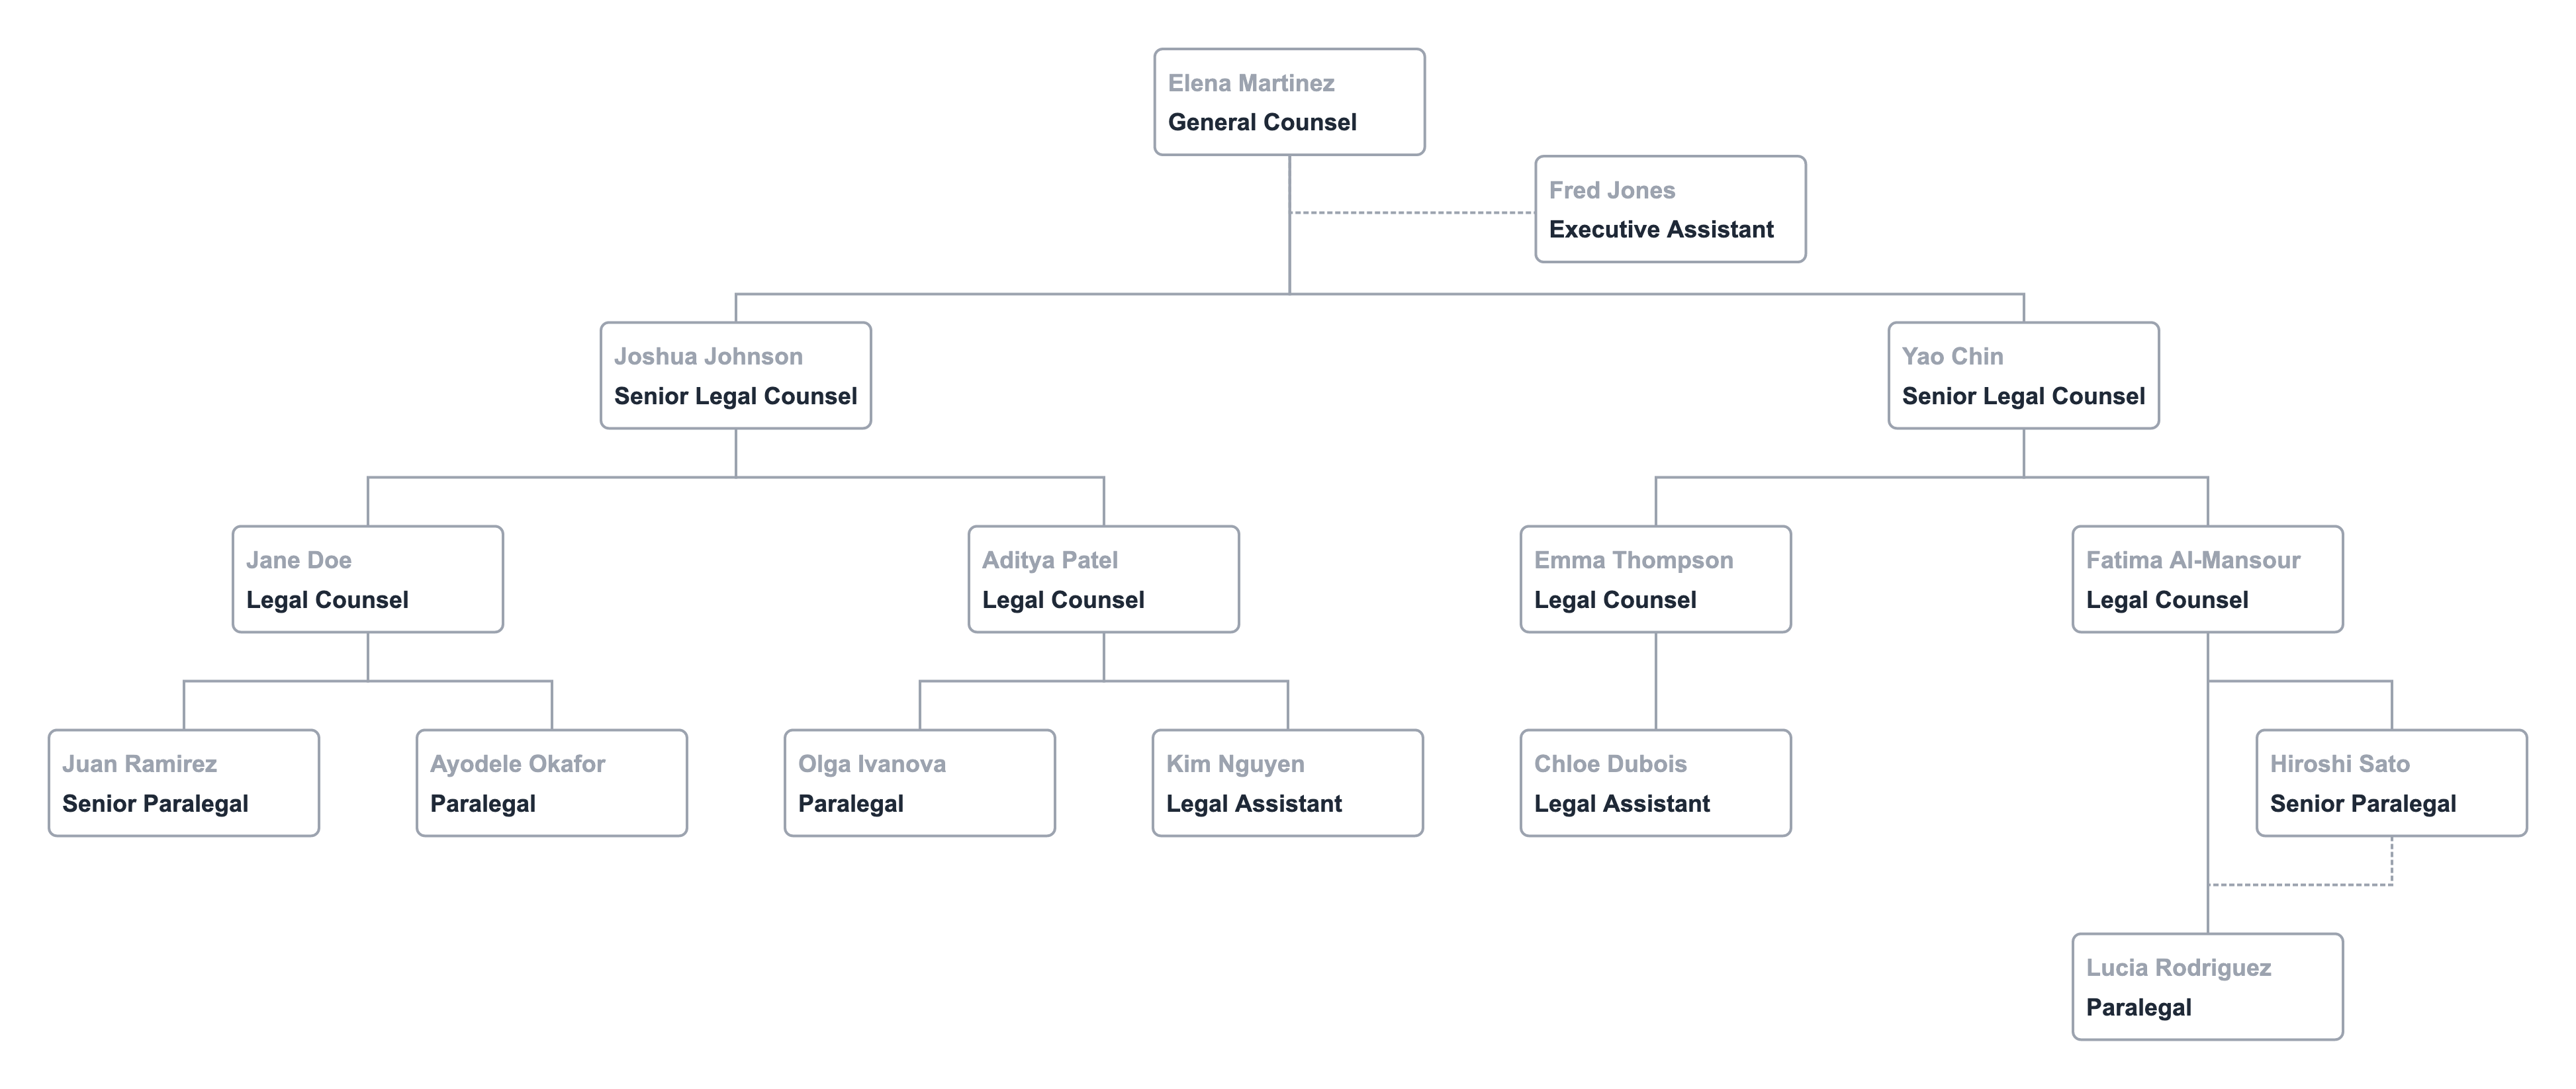 How to Structure a Legal Department